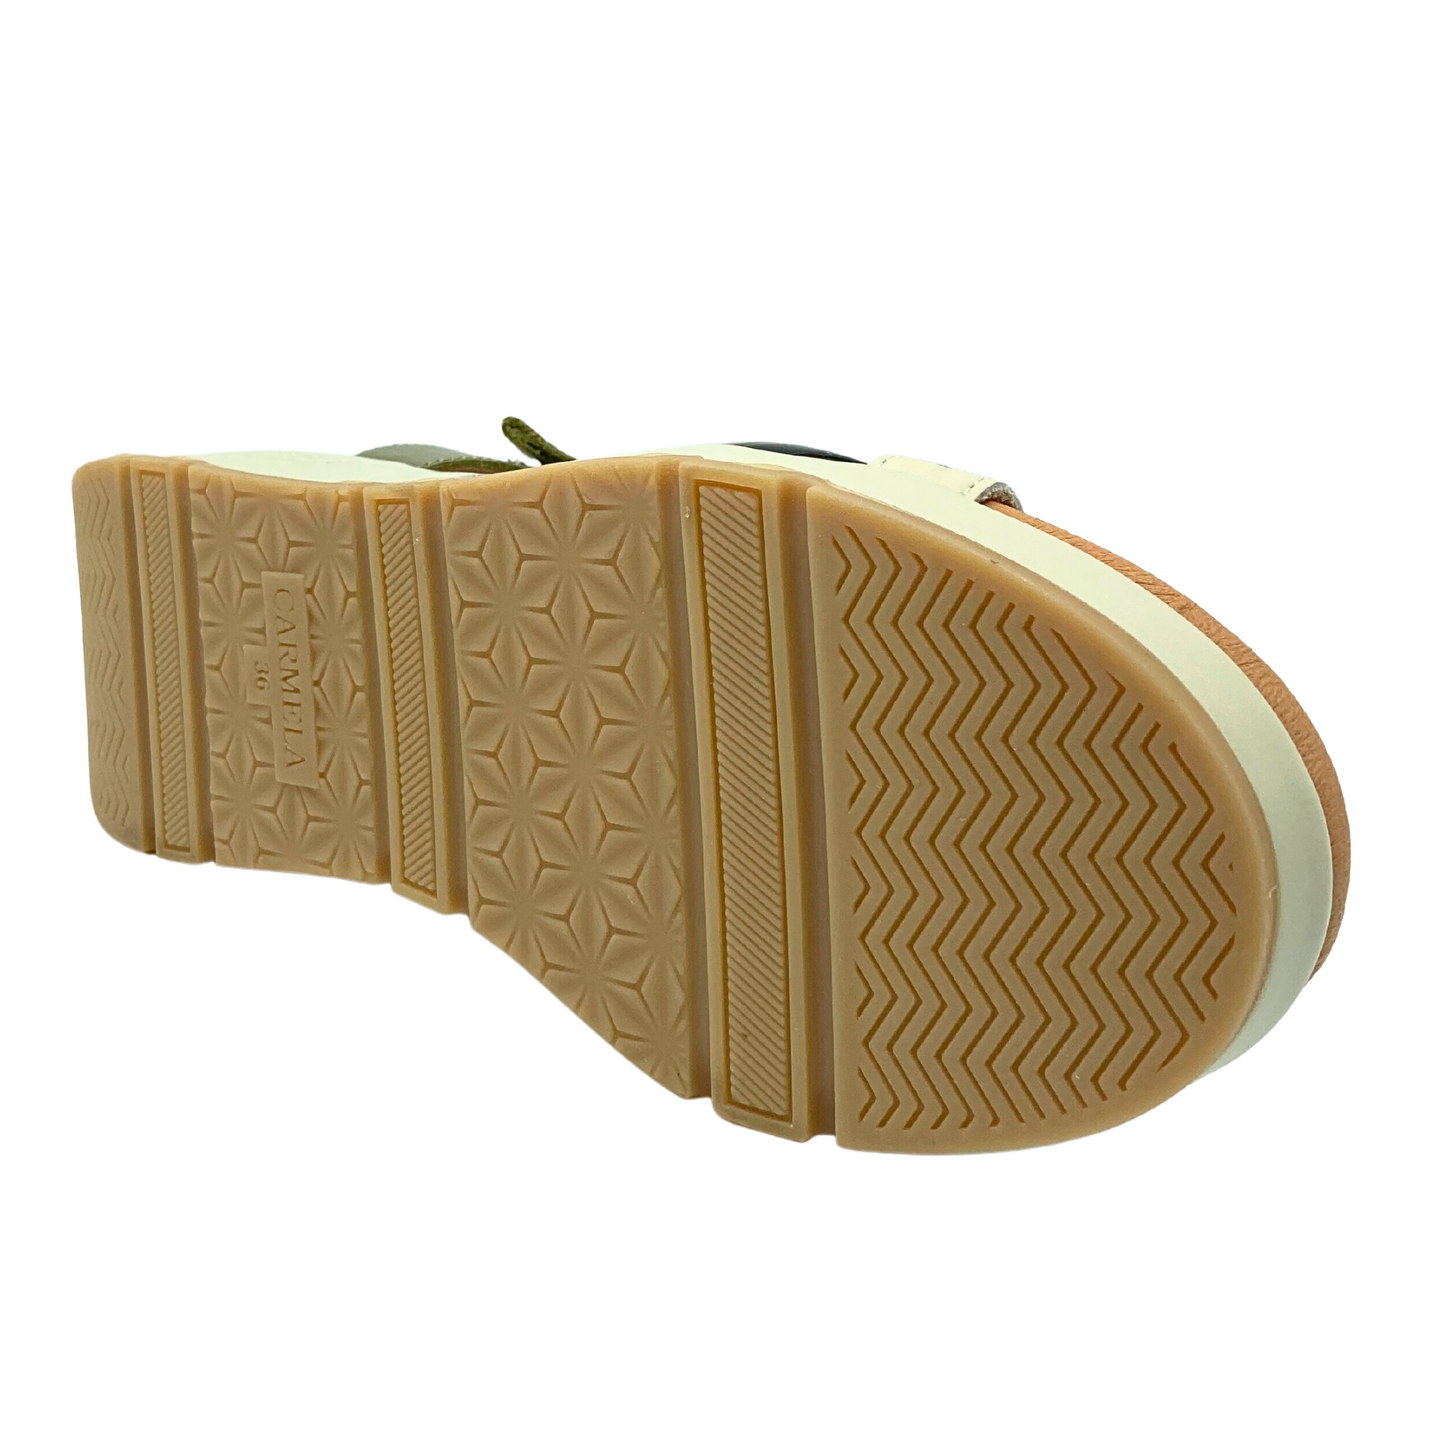 Bottom view of Carmela Rondo sandal.  Rubber sole makes it more grippy for all types of surfaces